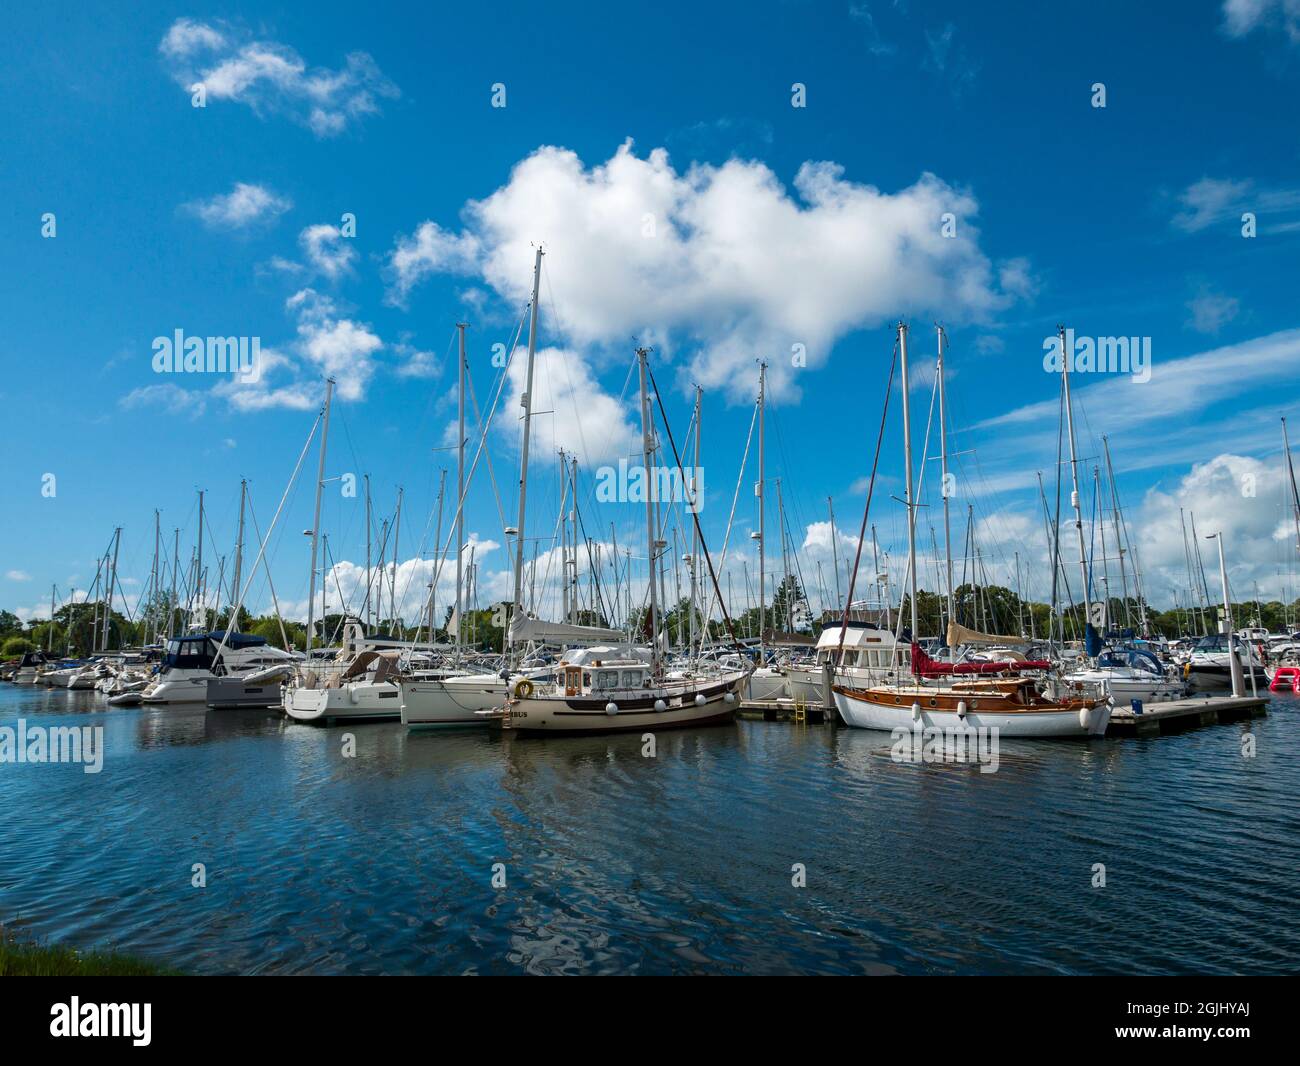 Chichester Marina, Chichester, West Sussex, Angleterre, Royaume-Uni. Banque D'Images